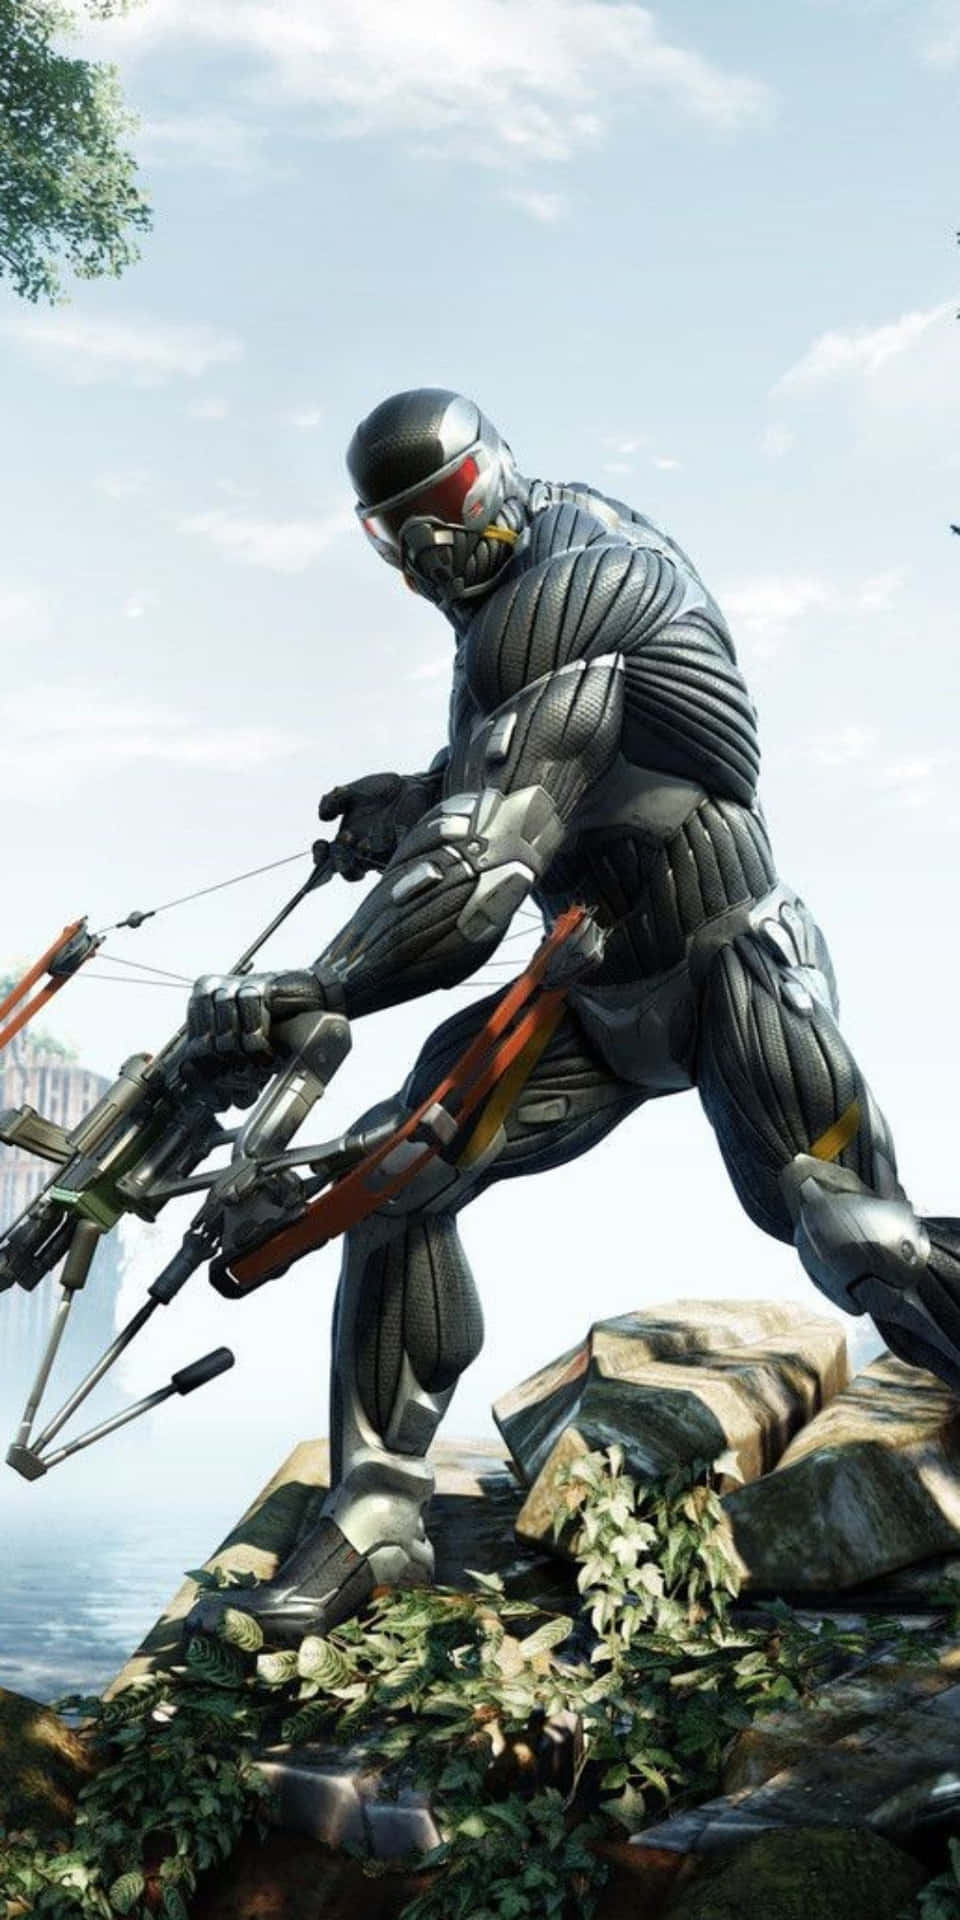 Enter into a new state of immersion with Pixel 3 Crysis 3